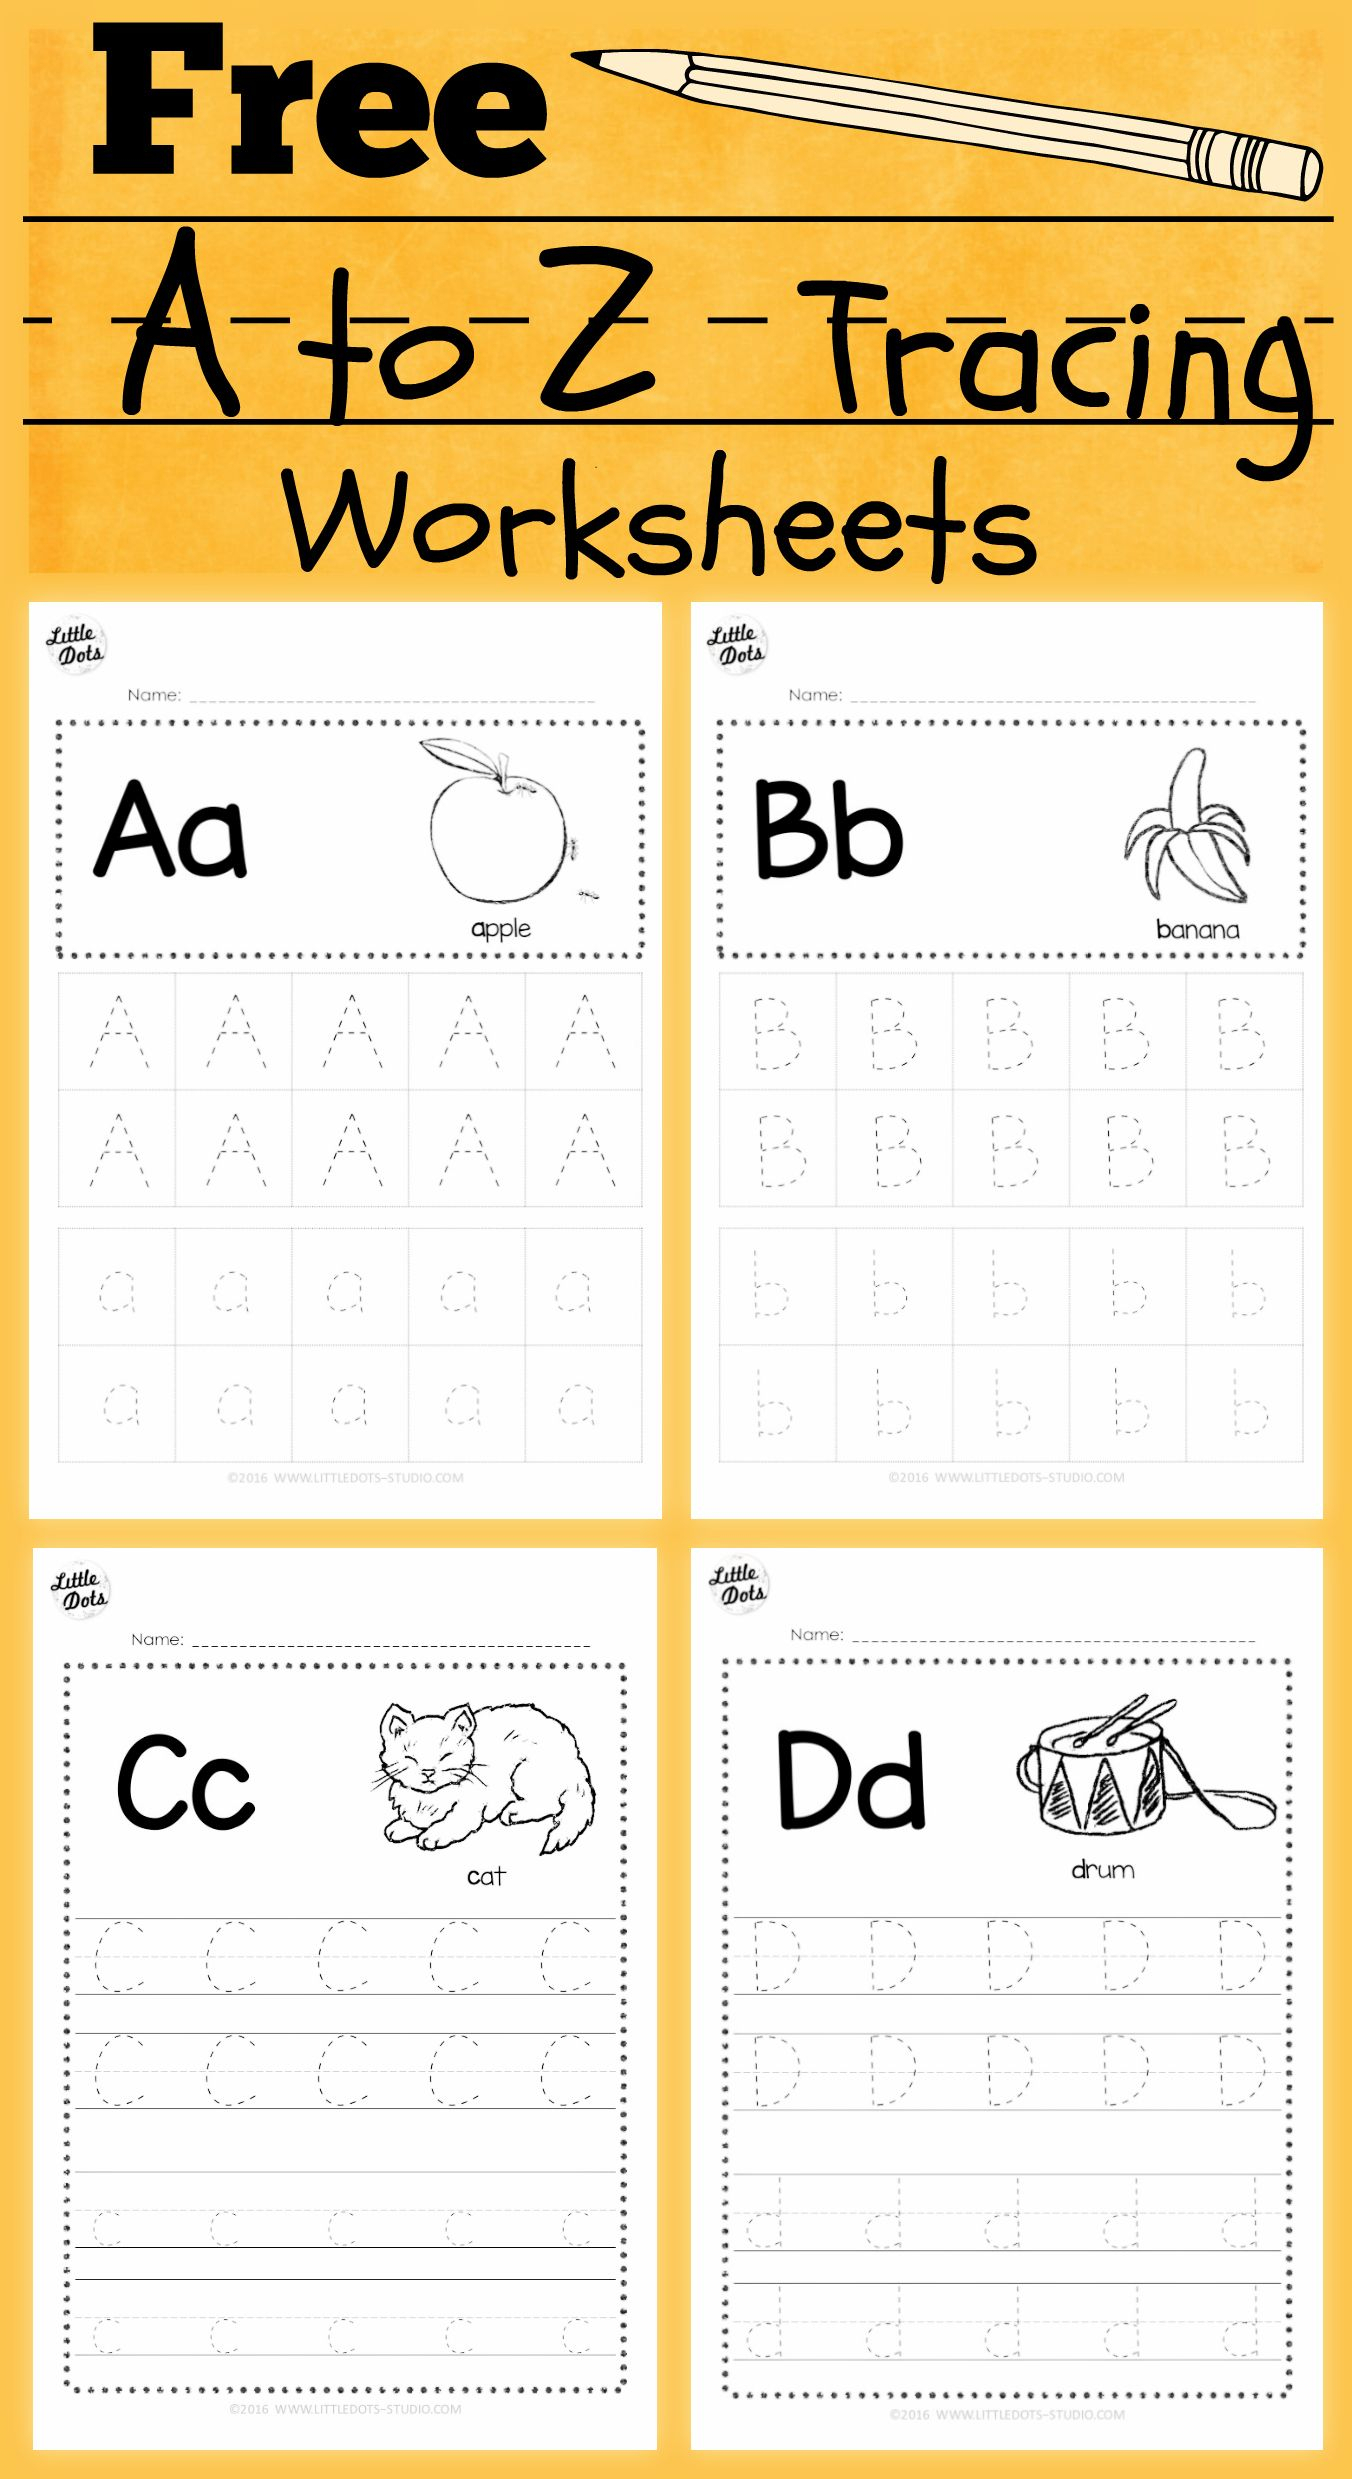 Download Free Alphabet Tracing Worksheets For Letter A To Z pertaining to Tracing Letters Download